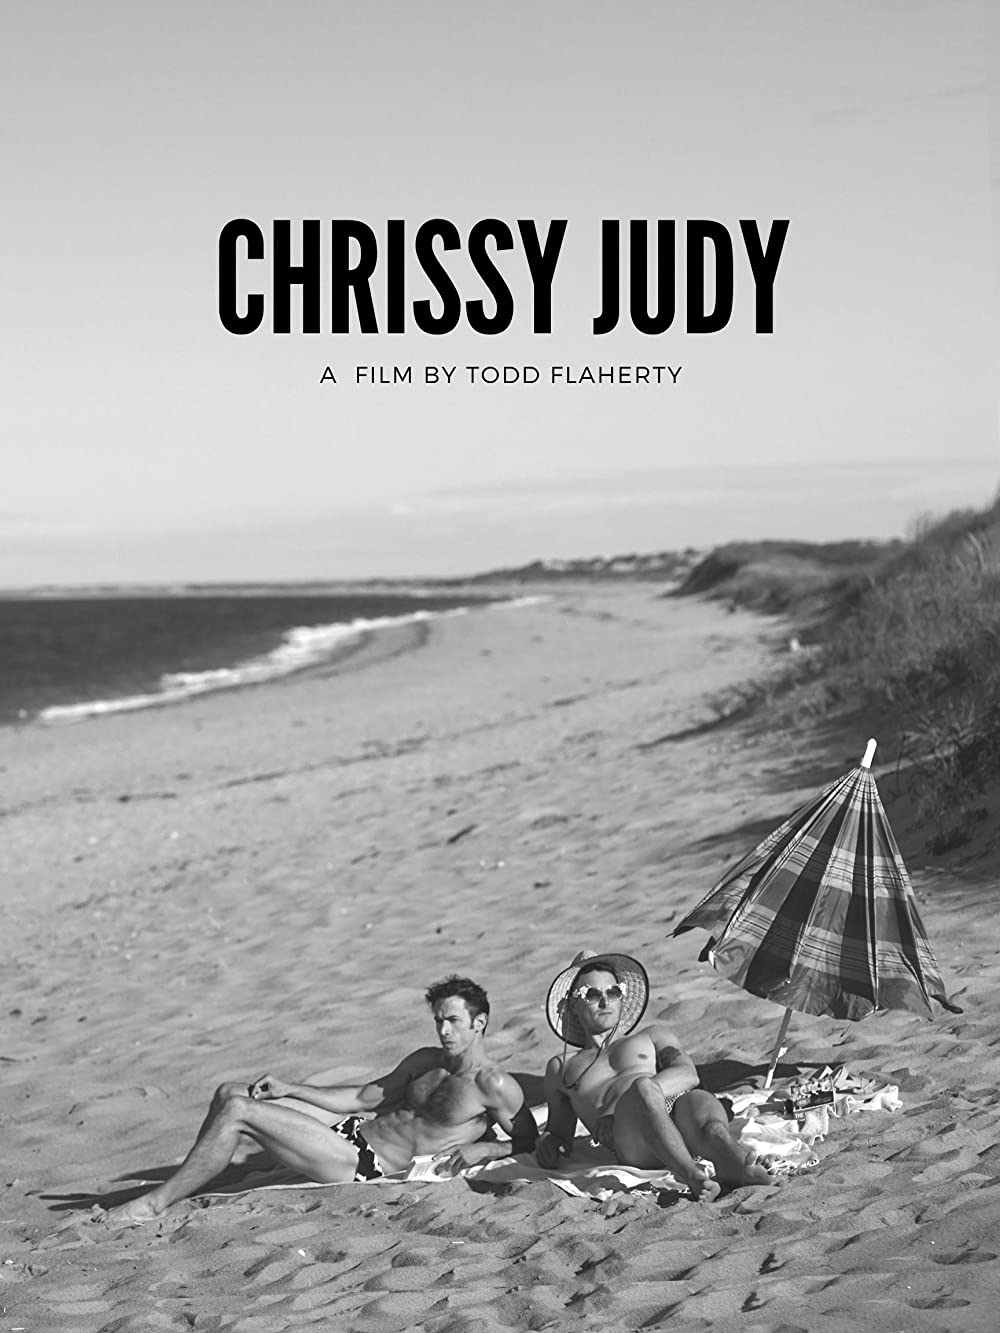 Nudist Exhibitionist At The Beach - Chrissy Judy: A Film Review - The Gay & Lesbian Review